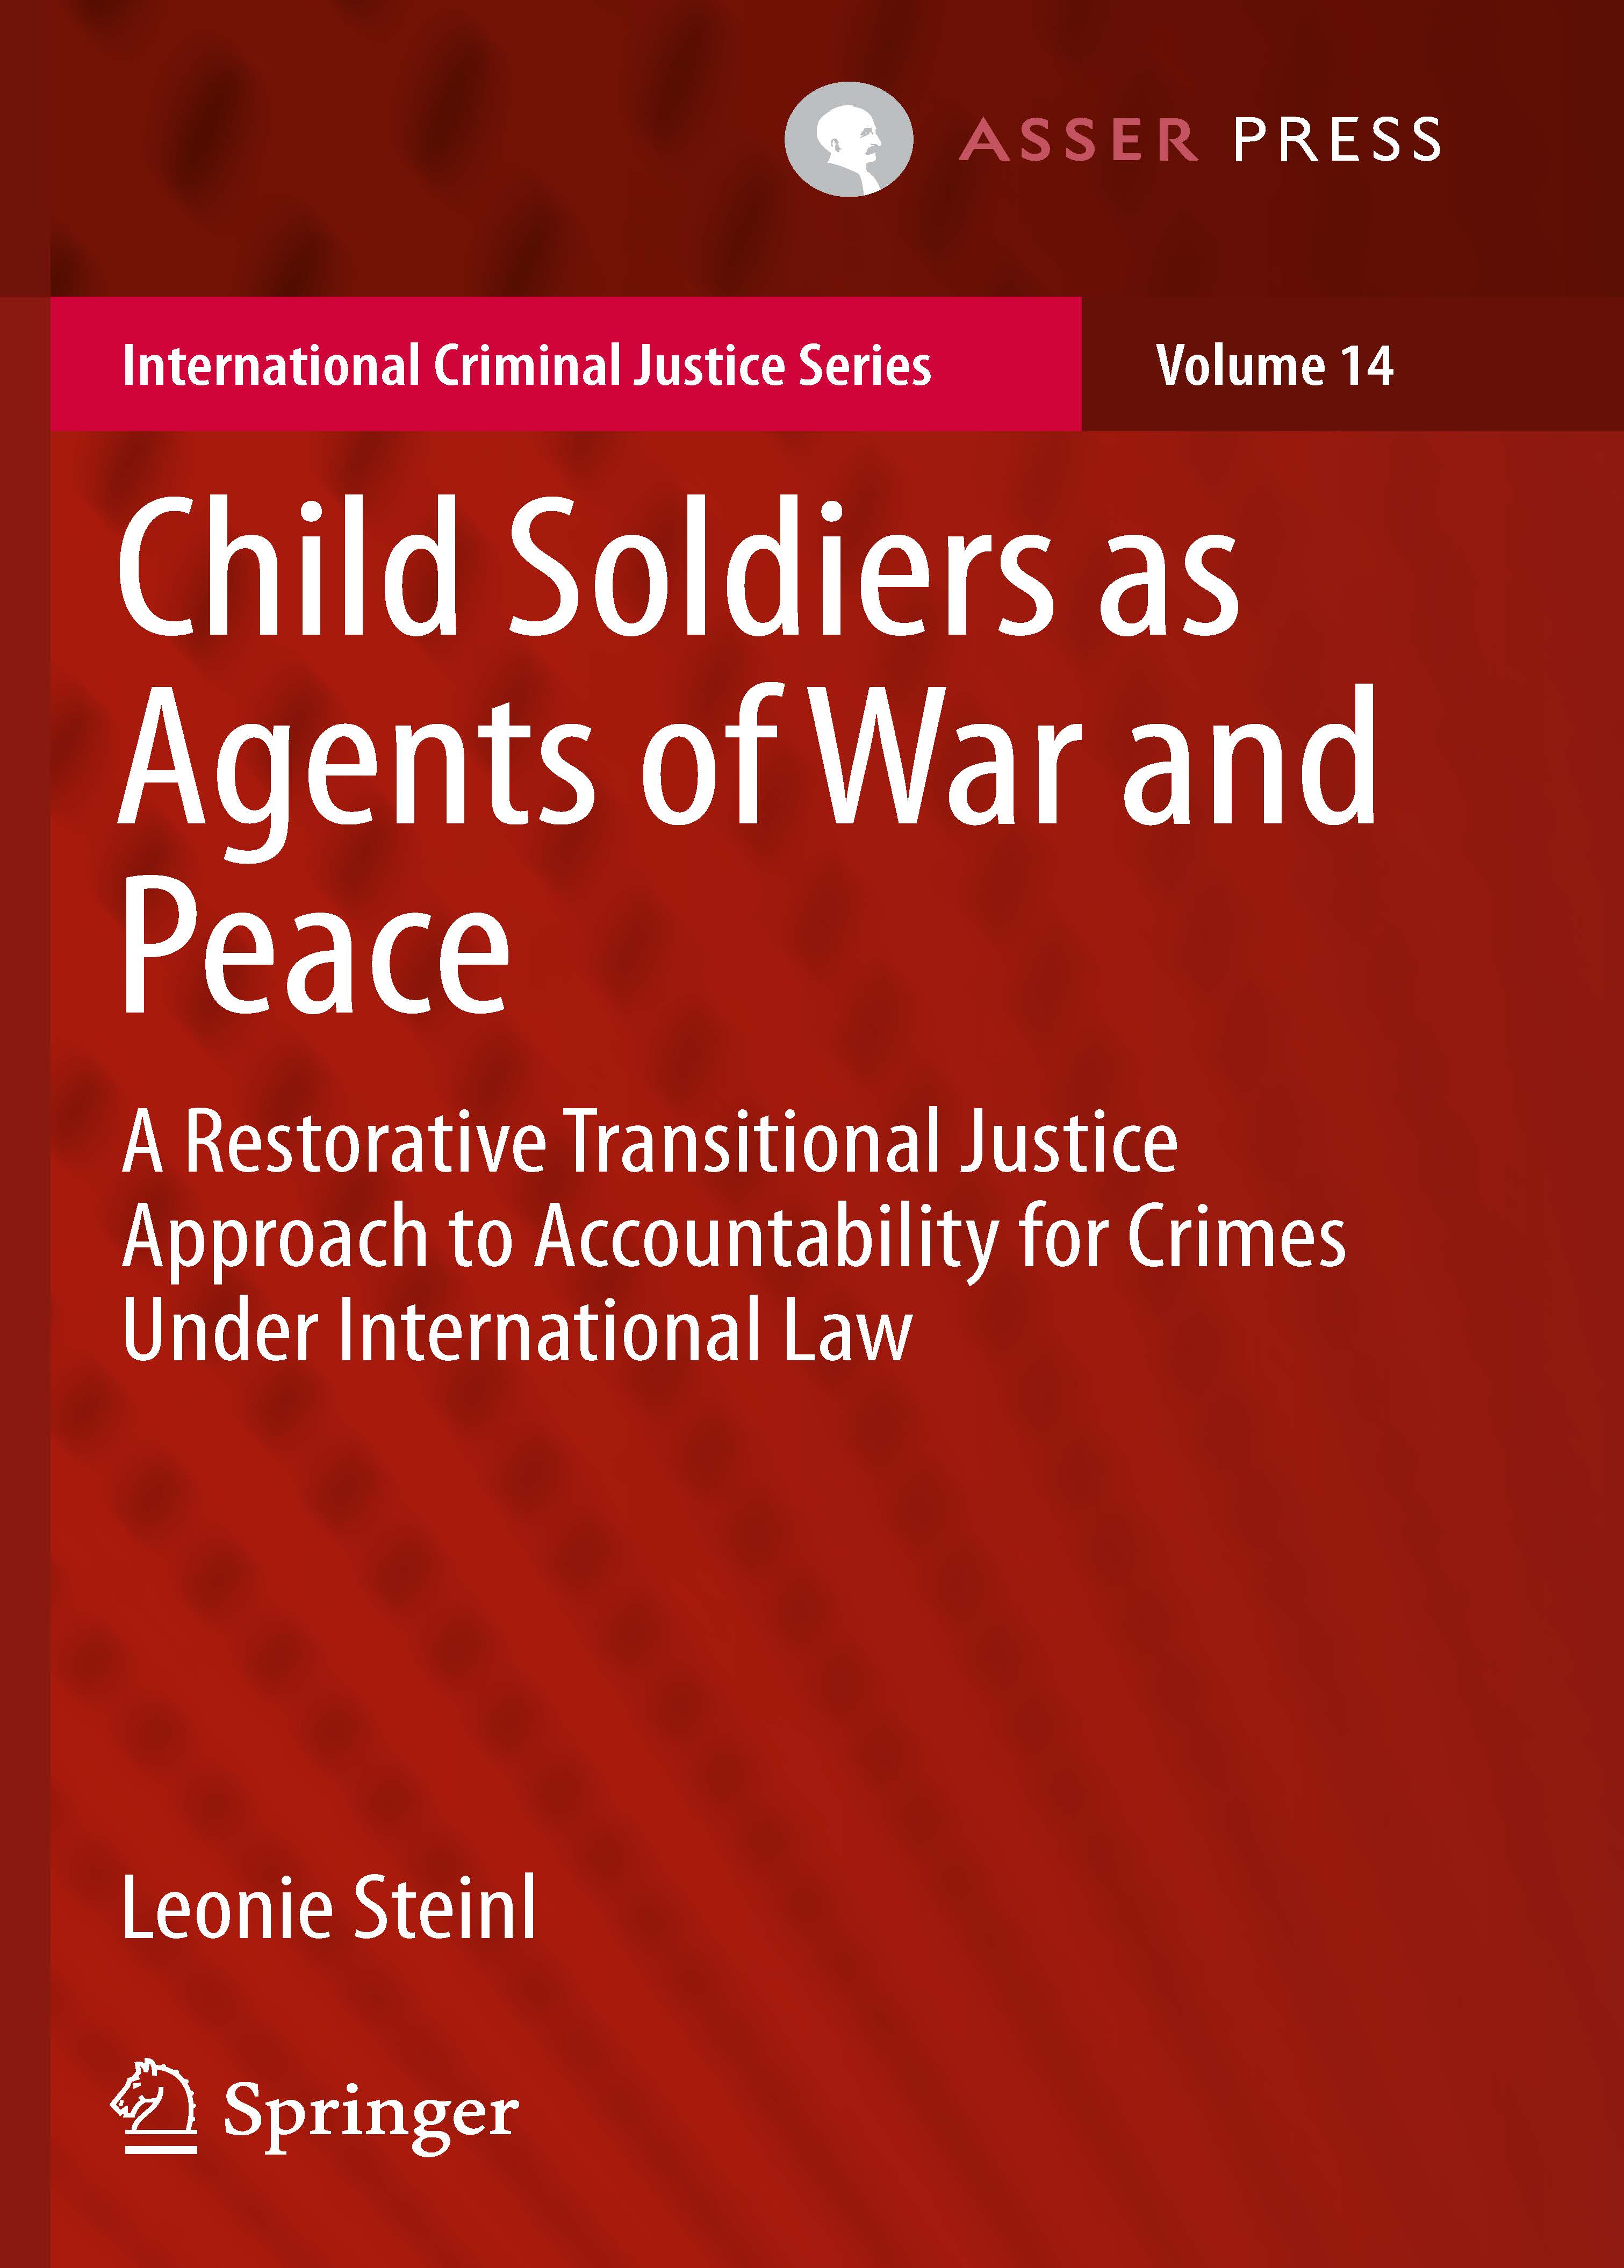 Child Soldiers as Agents of War and Peace - A Restorative Transitional Justice Approach to Accountability for Crimes Under International Law